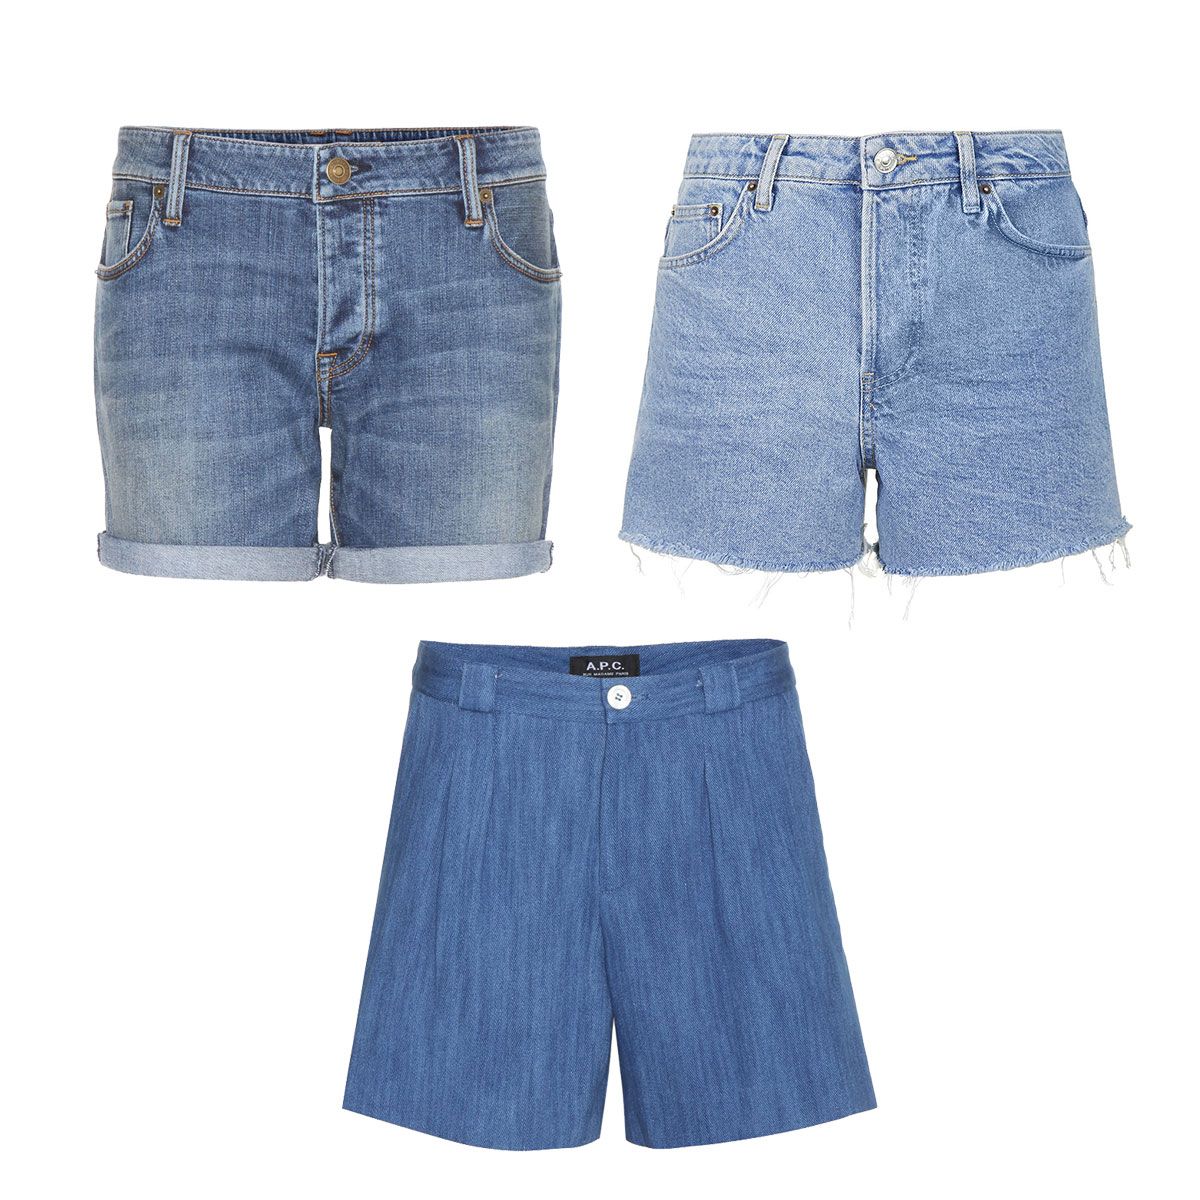 Struggling To Find Flattering Shorts? These Are The Best Shorts